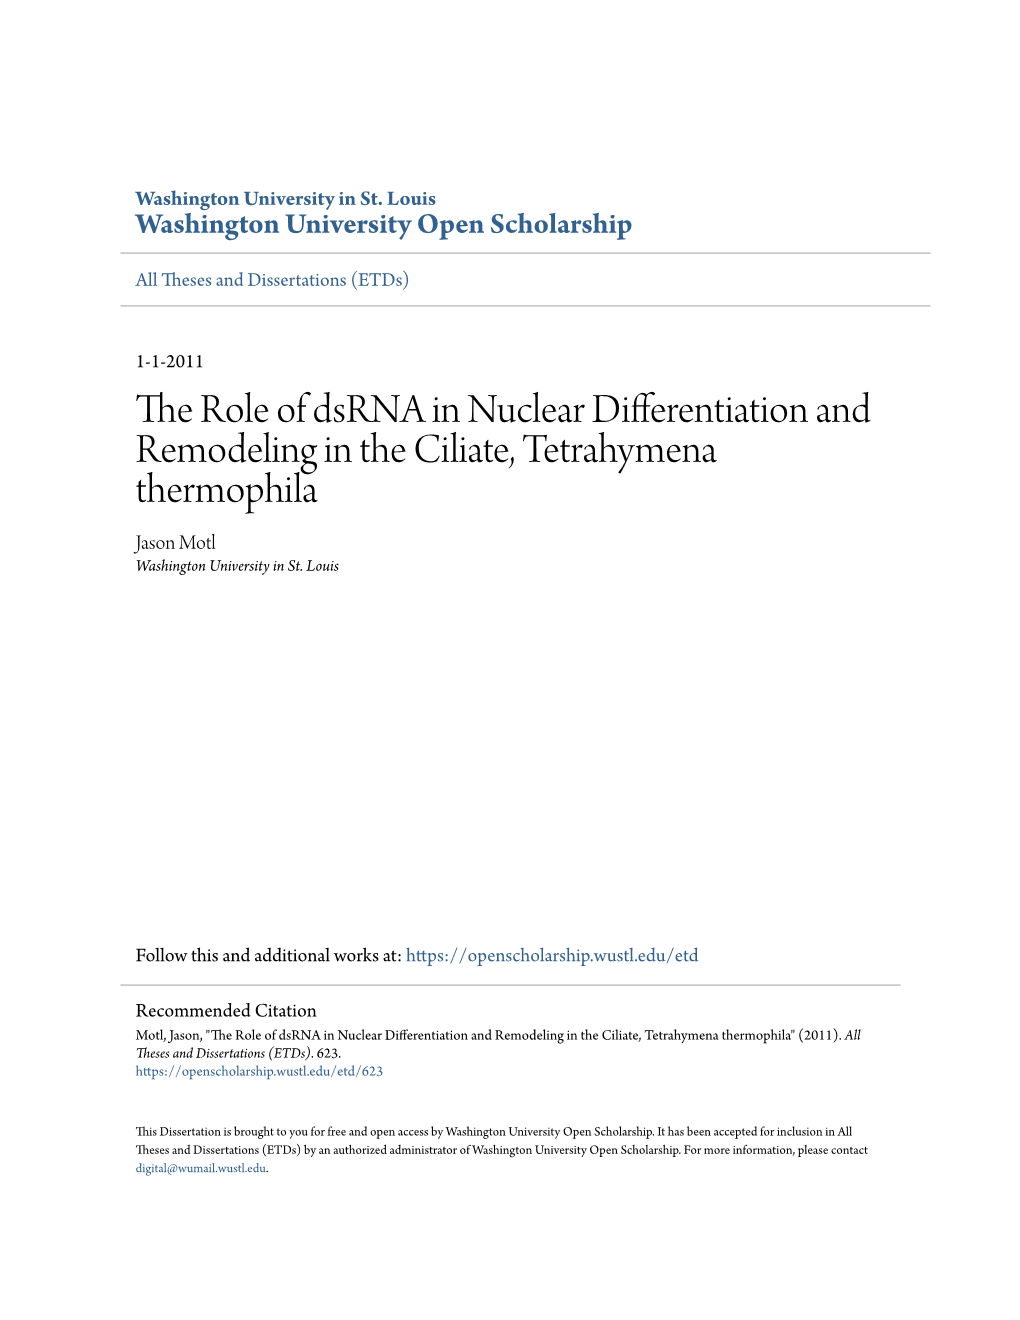 The Role of Dsrna in Nuclear Differentiation and Remodeling in the Ciliate, Tetrahymena Thermophila Jason Motl Washington University in St